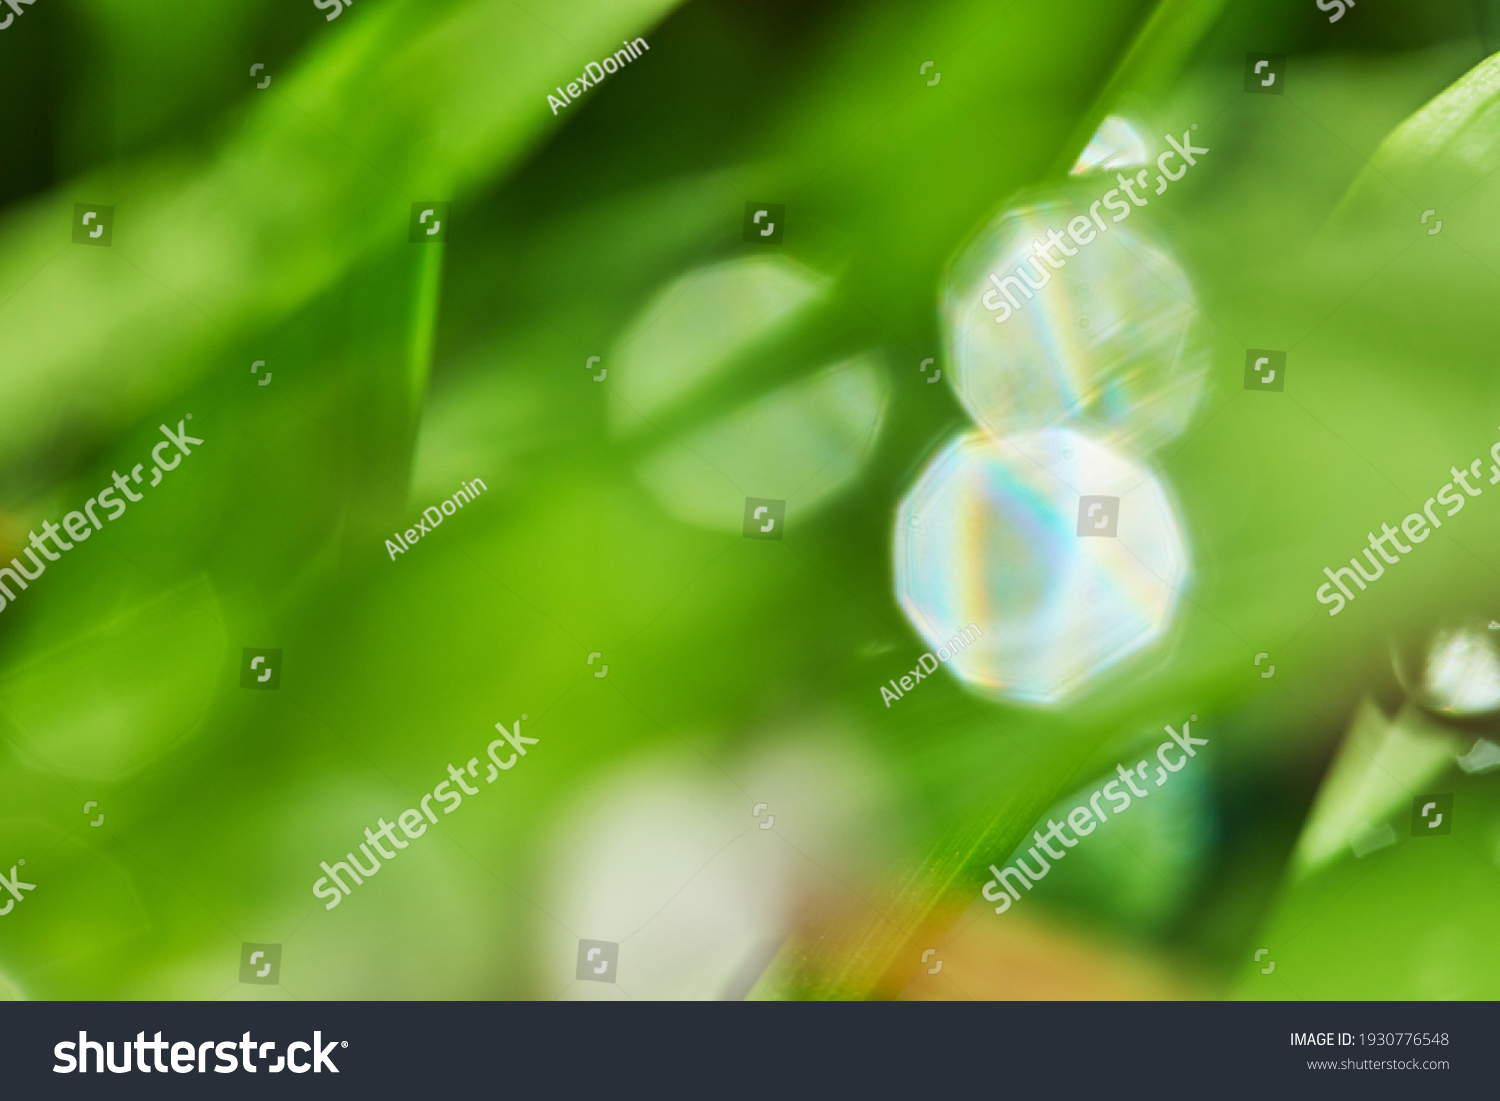 Green grass background texture and surface with shiny dew drops in blur. #1930776548